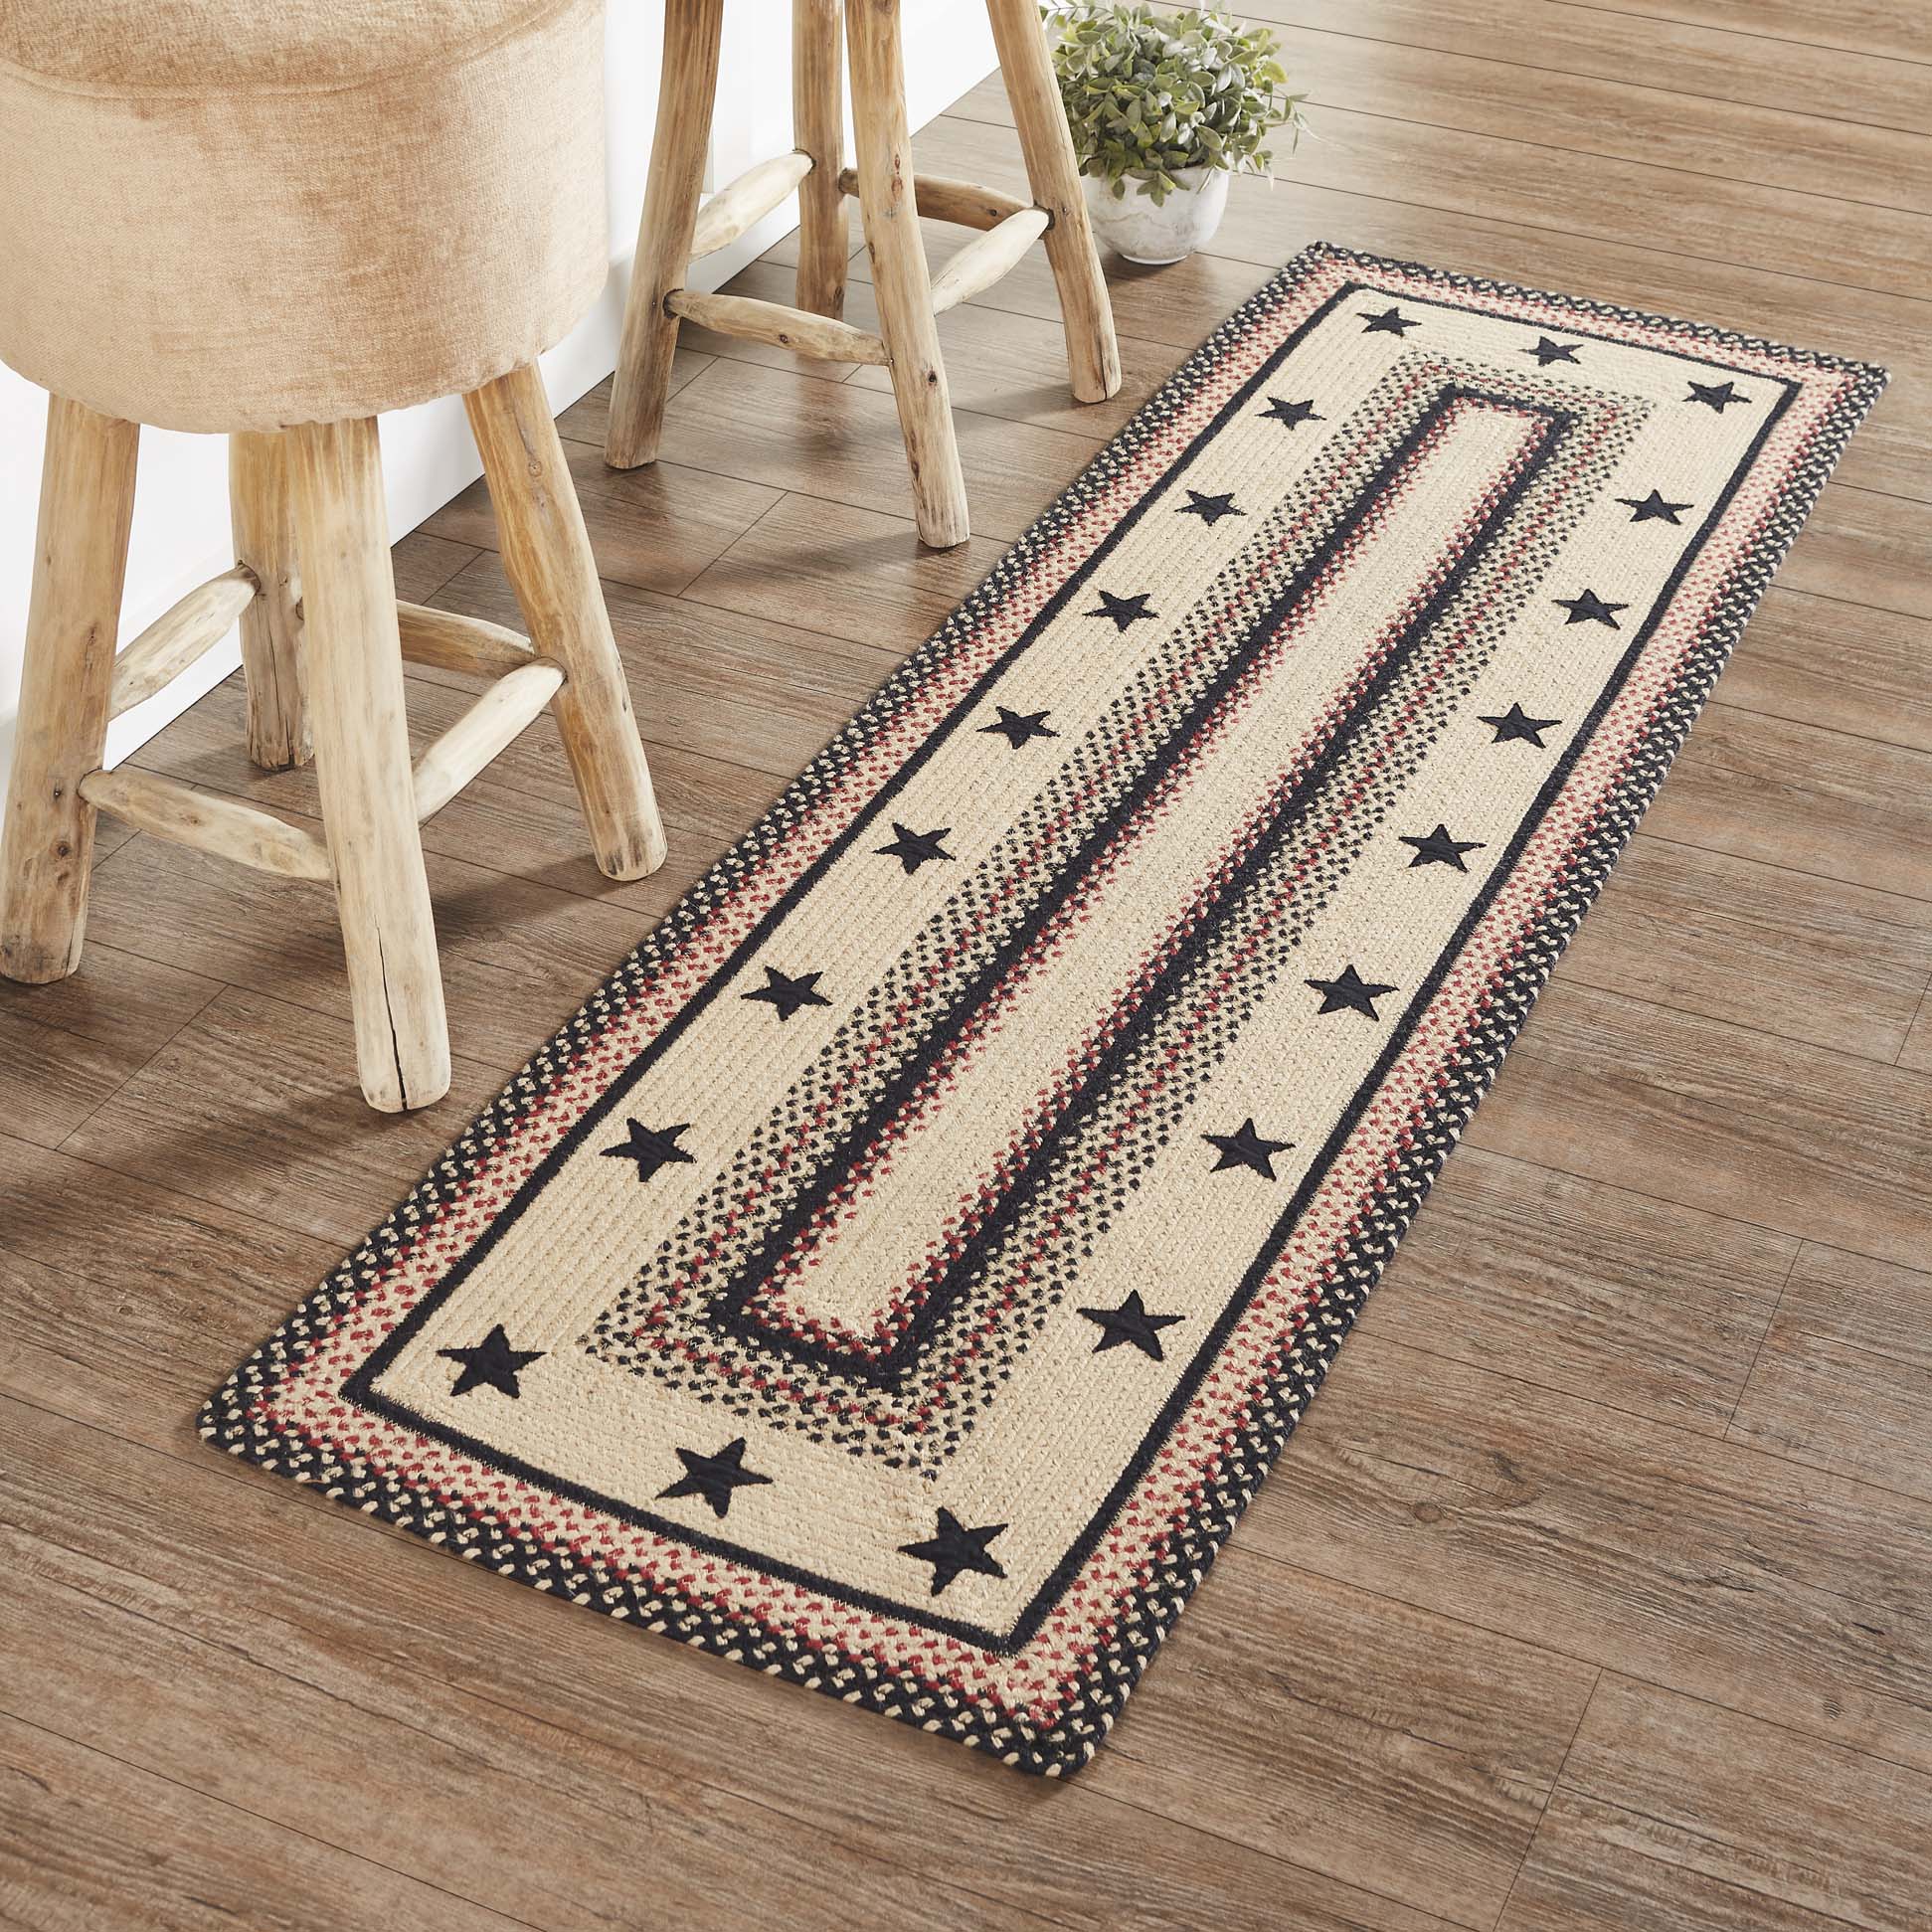 Colonial Star Jute Braided Rug/Runner Rect with Rug Pad 22"x72" VHC Brands